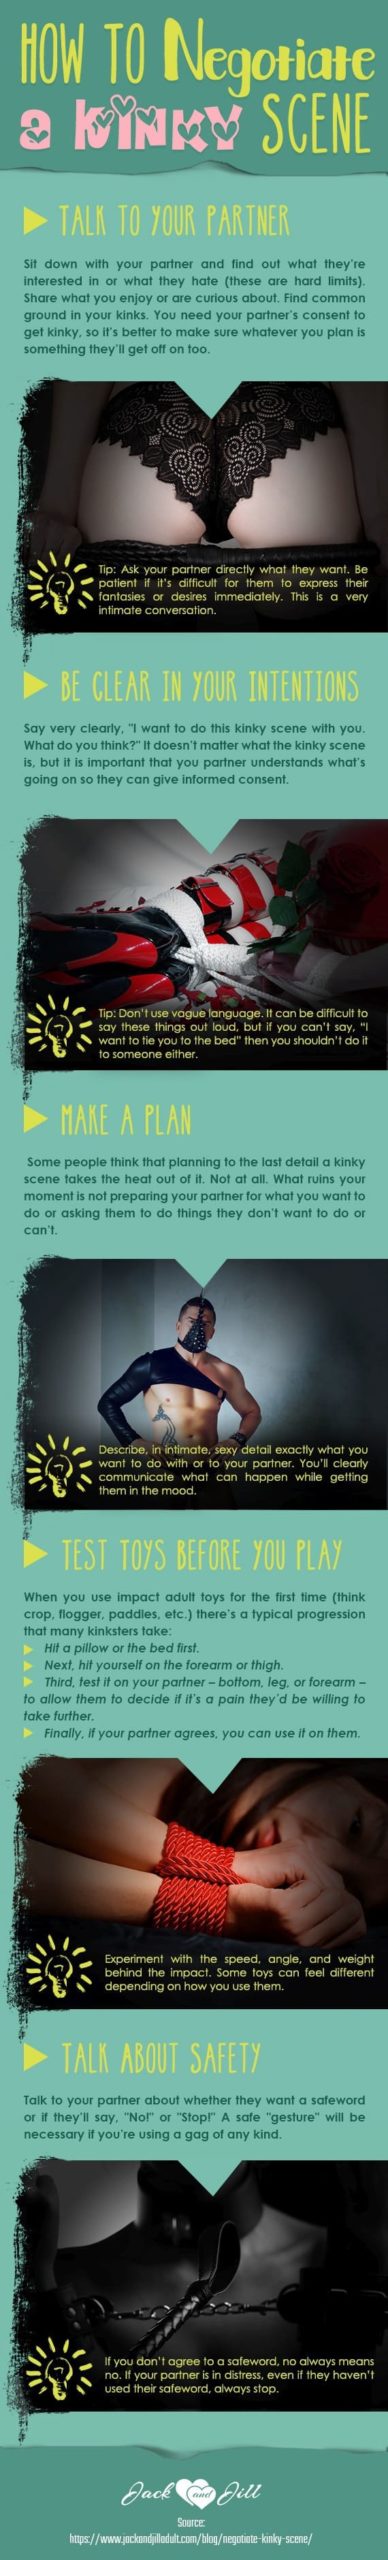 Infographic for How to Negotiate a Kinky Scene